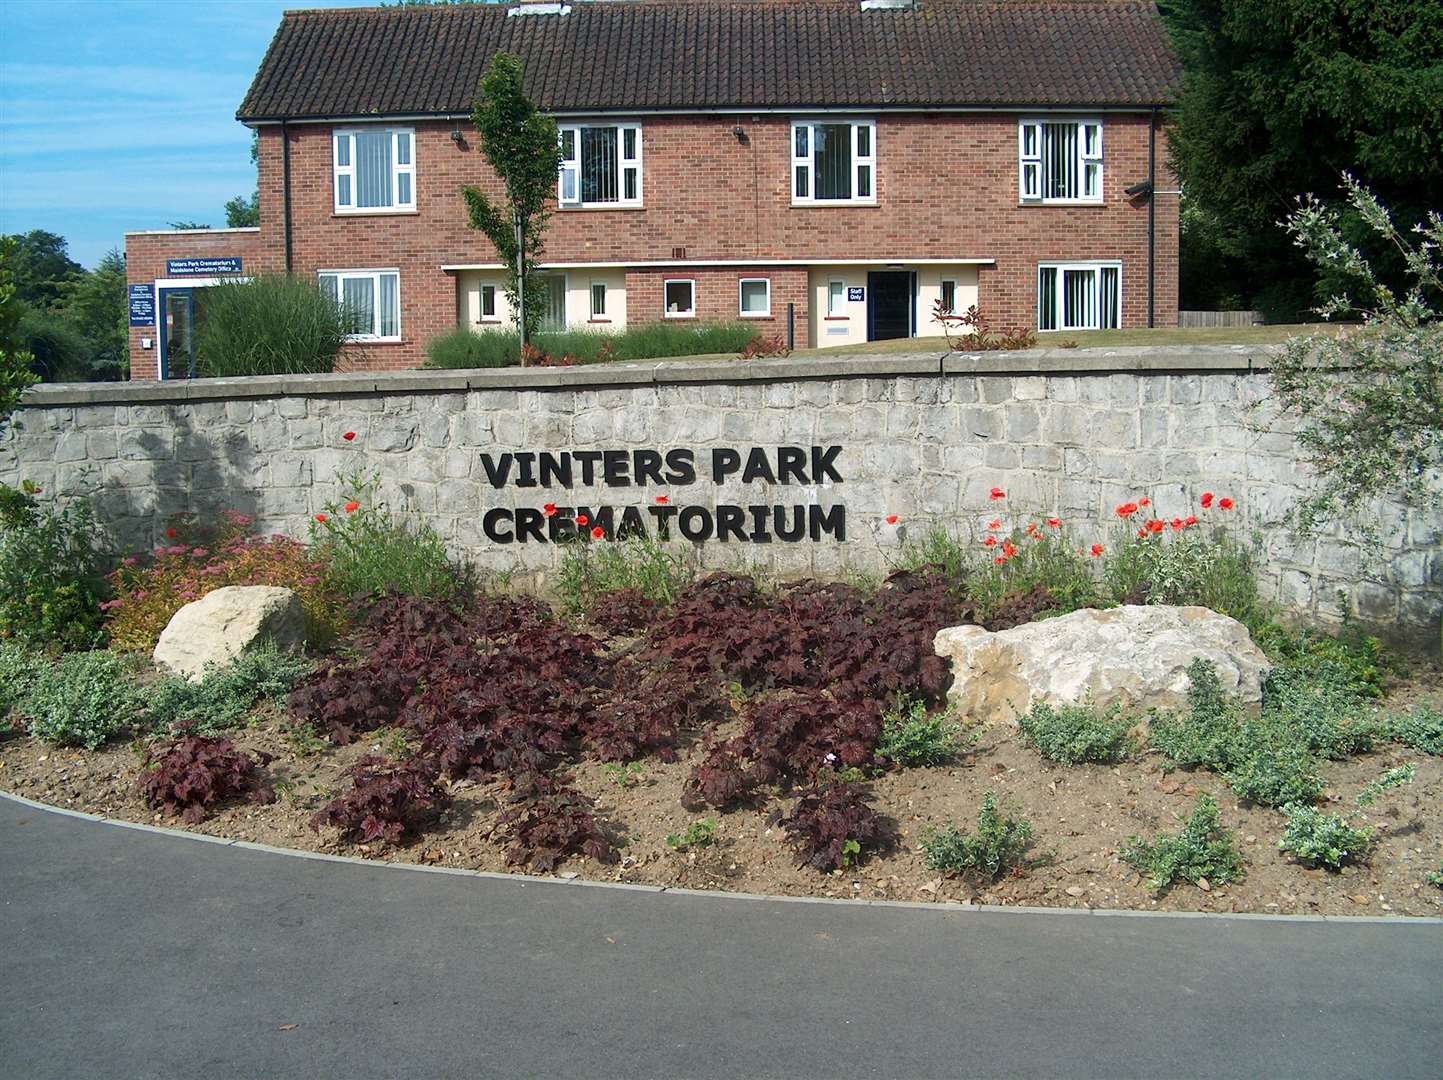 Vinters Park Crematorium: mourners are limited to 30